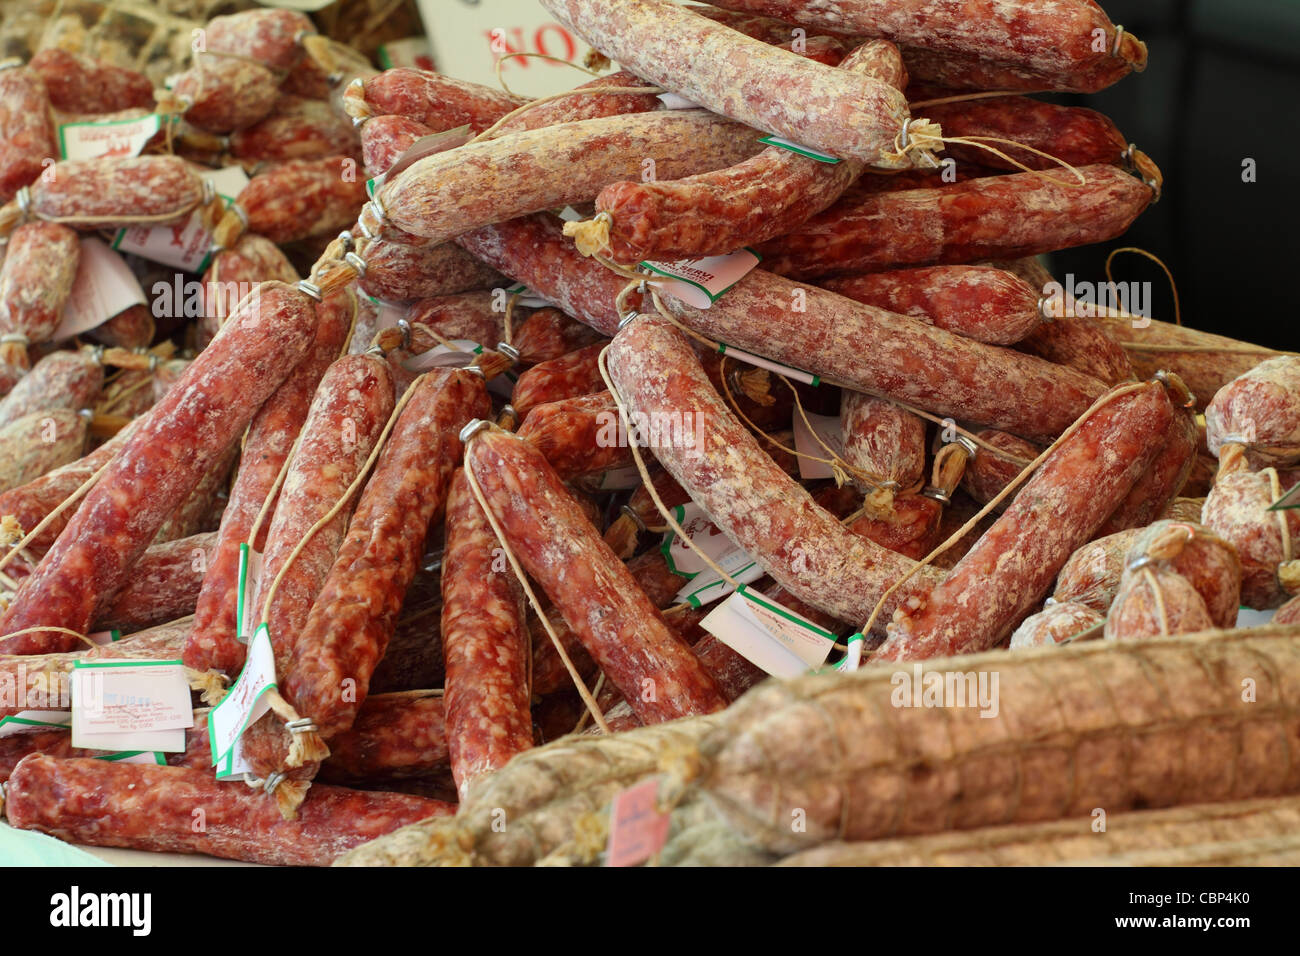 Traditional Italian sausages on display at farmer's market  Stock Photo